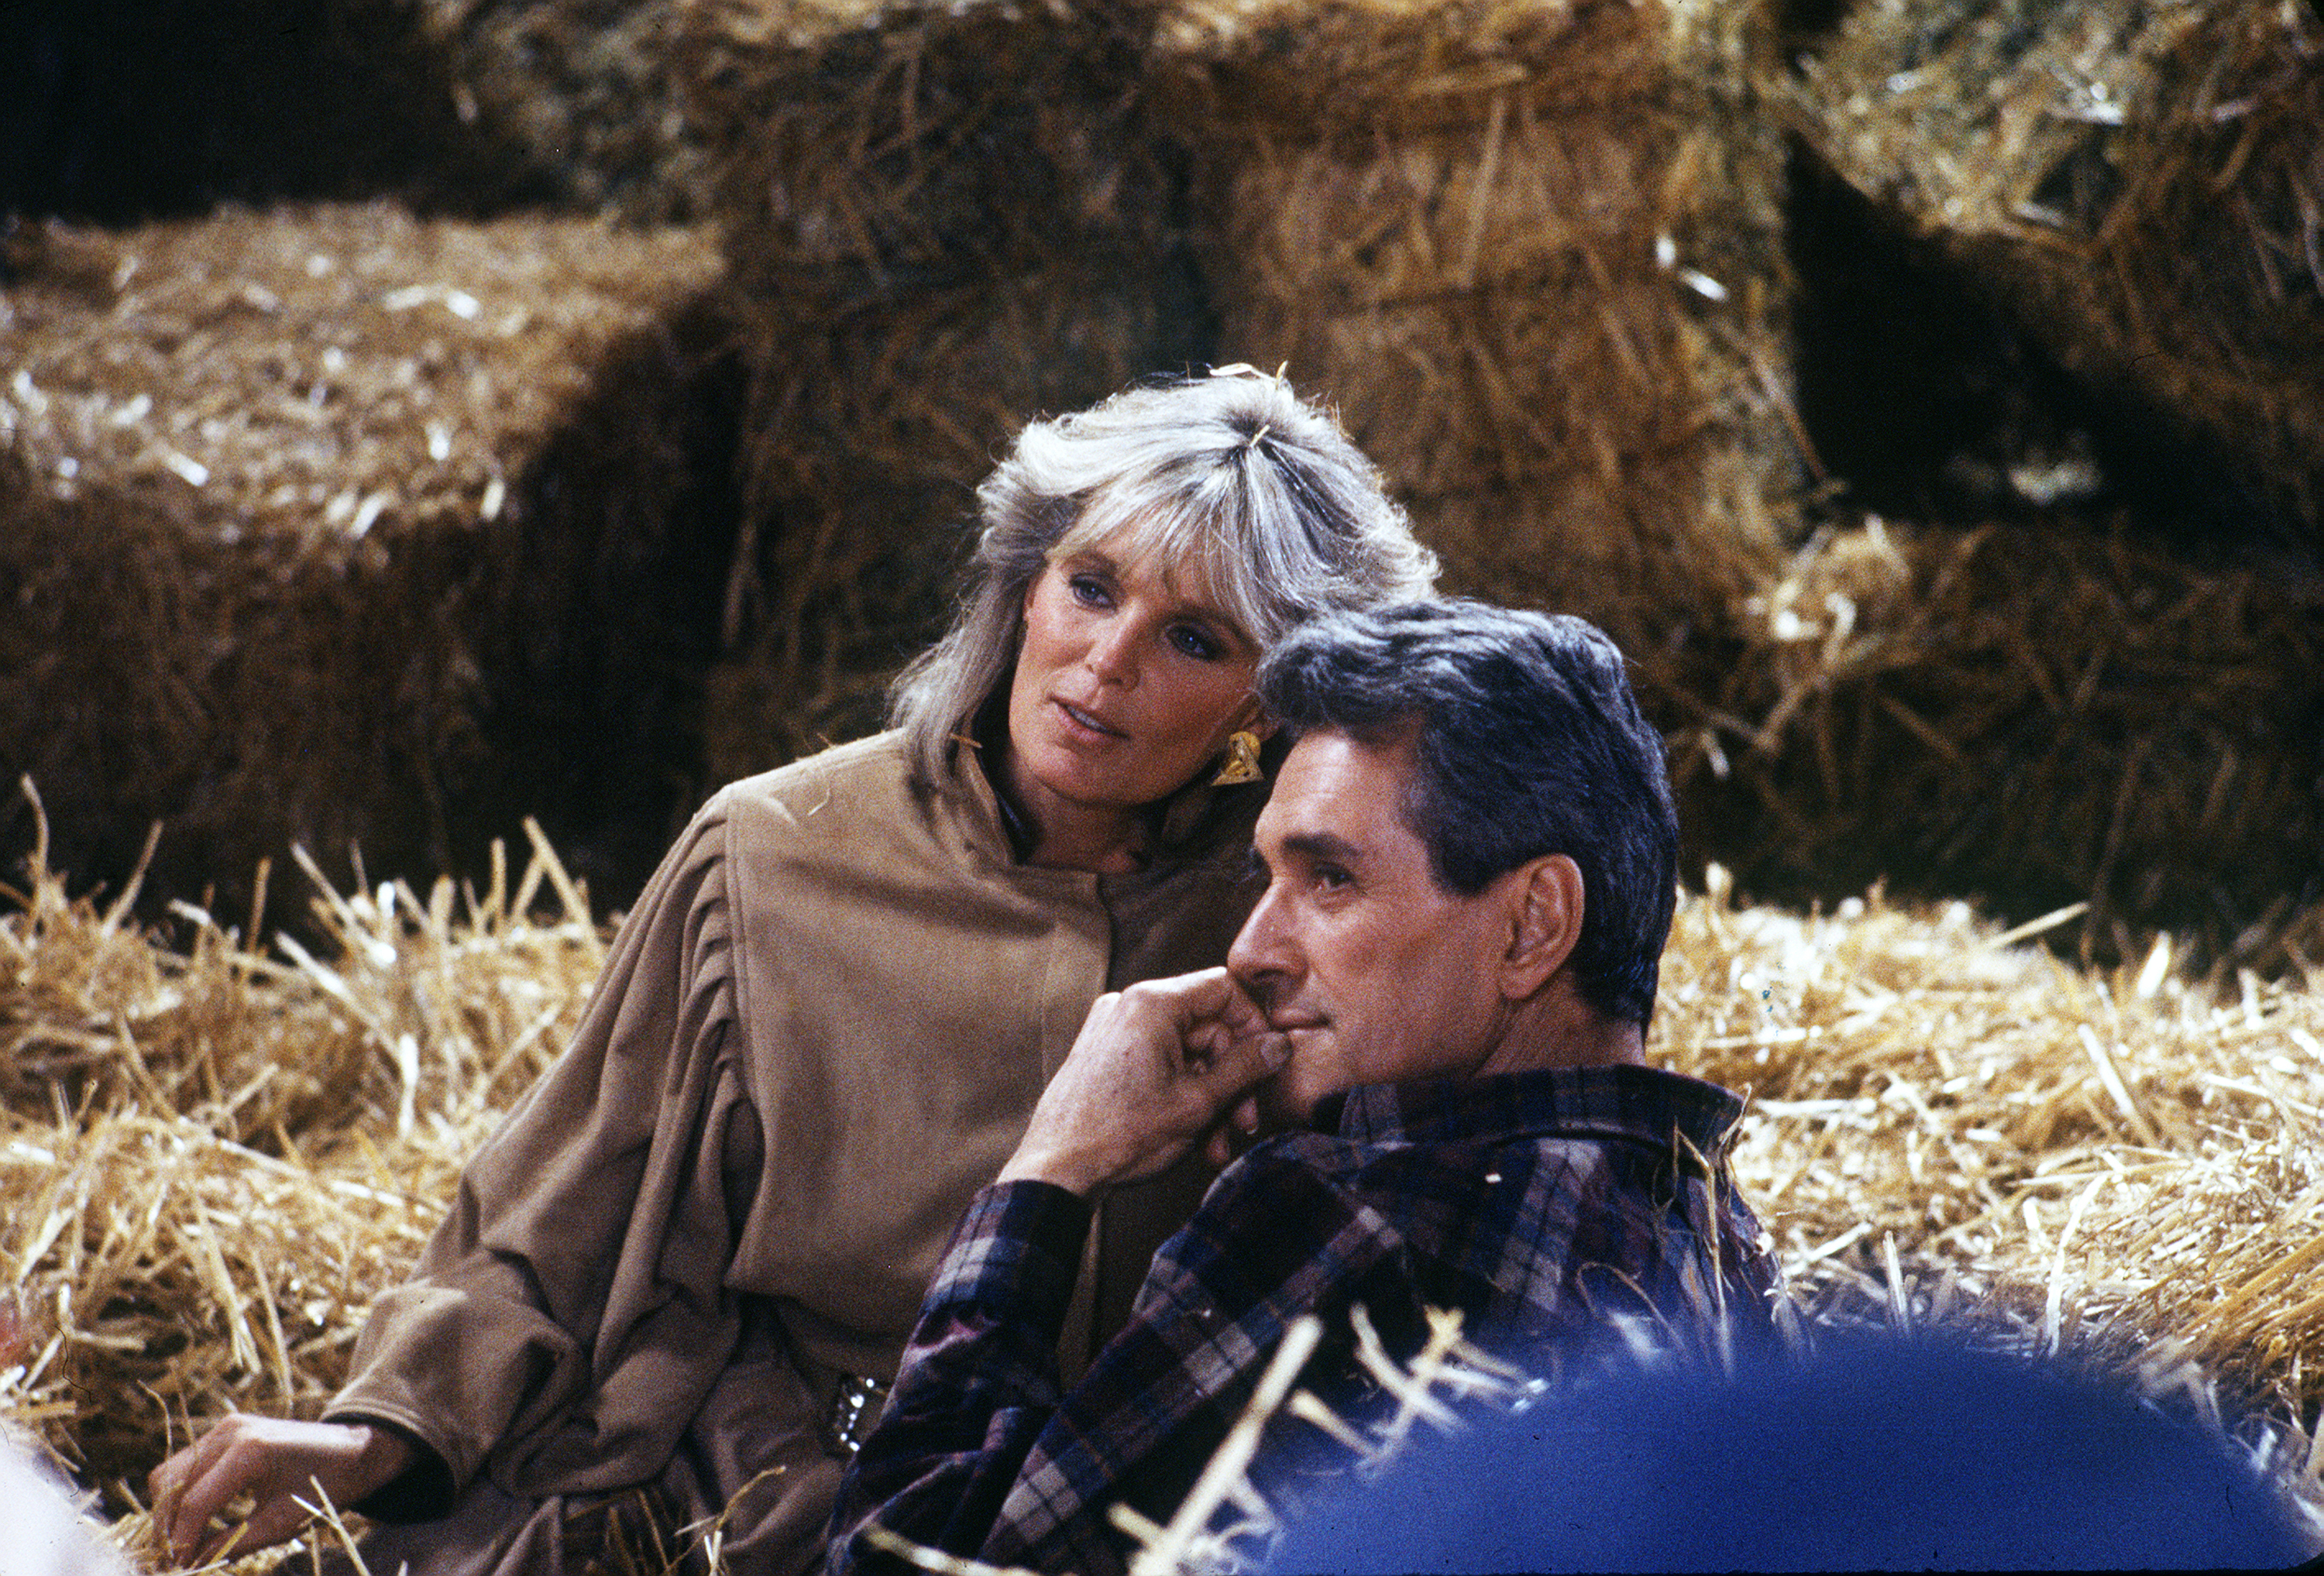 Linda Evans and Rock Hudson in "The Avenger" episode of "Dynasty" in 1985. | Source: Getty Images